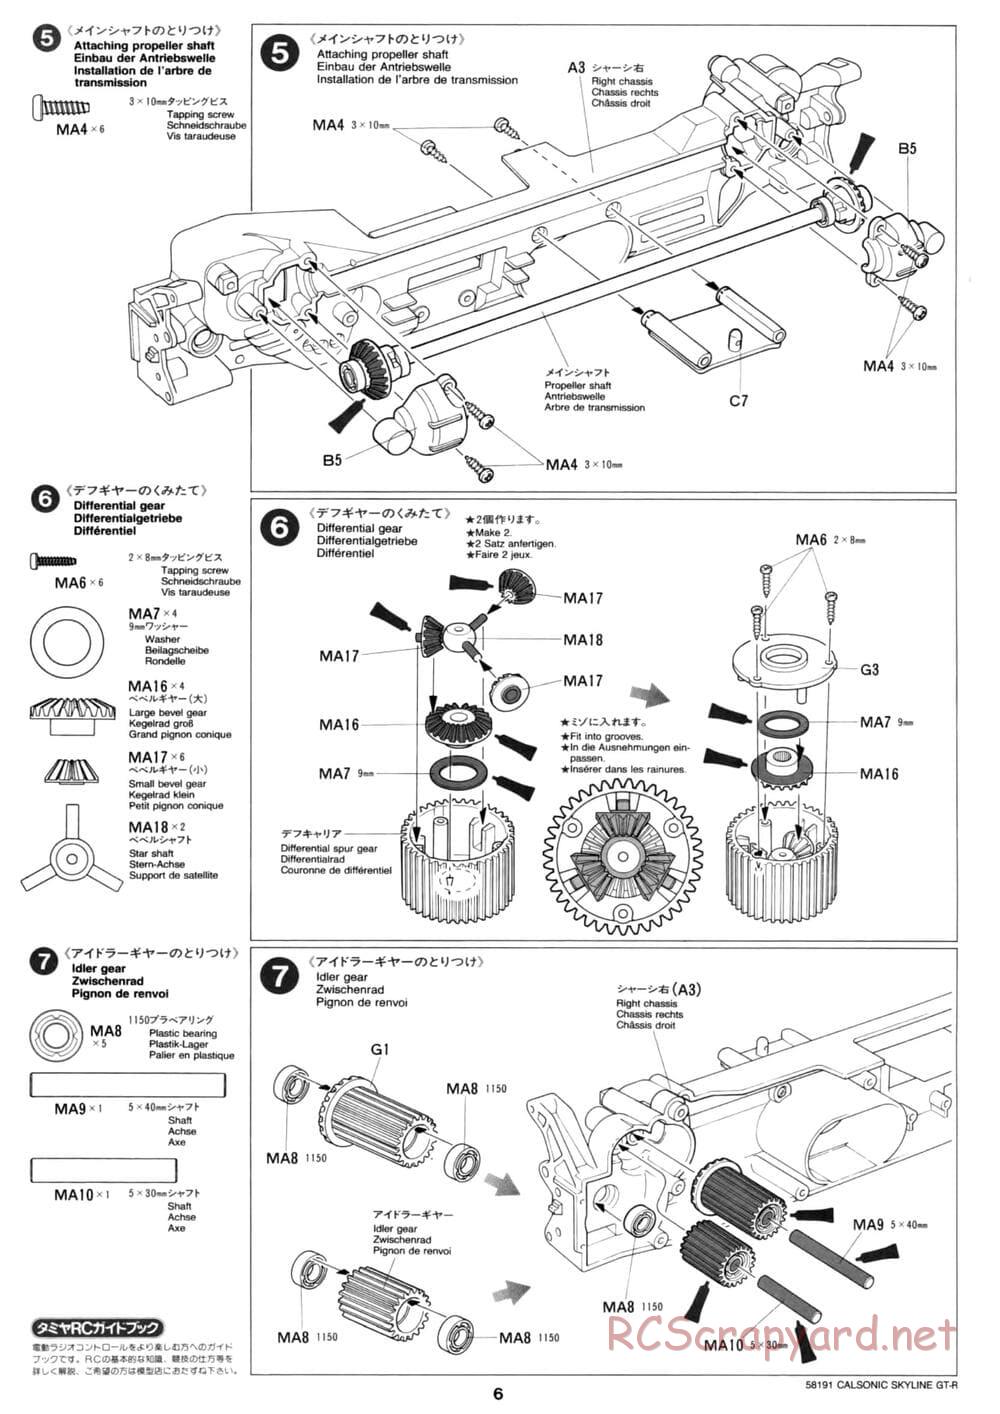 Tamiya - Calsonic Skyline GT-R - TL-01 Chassis - Manual - Page 6